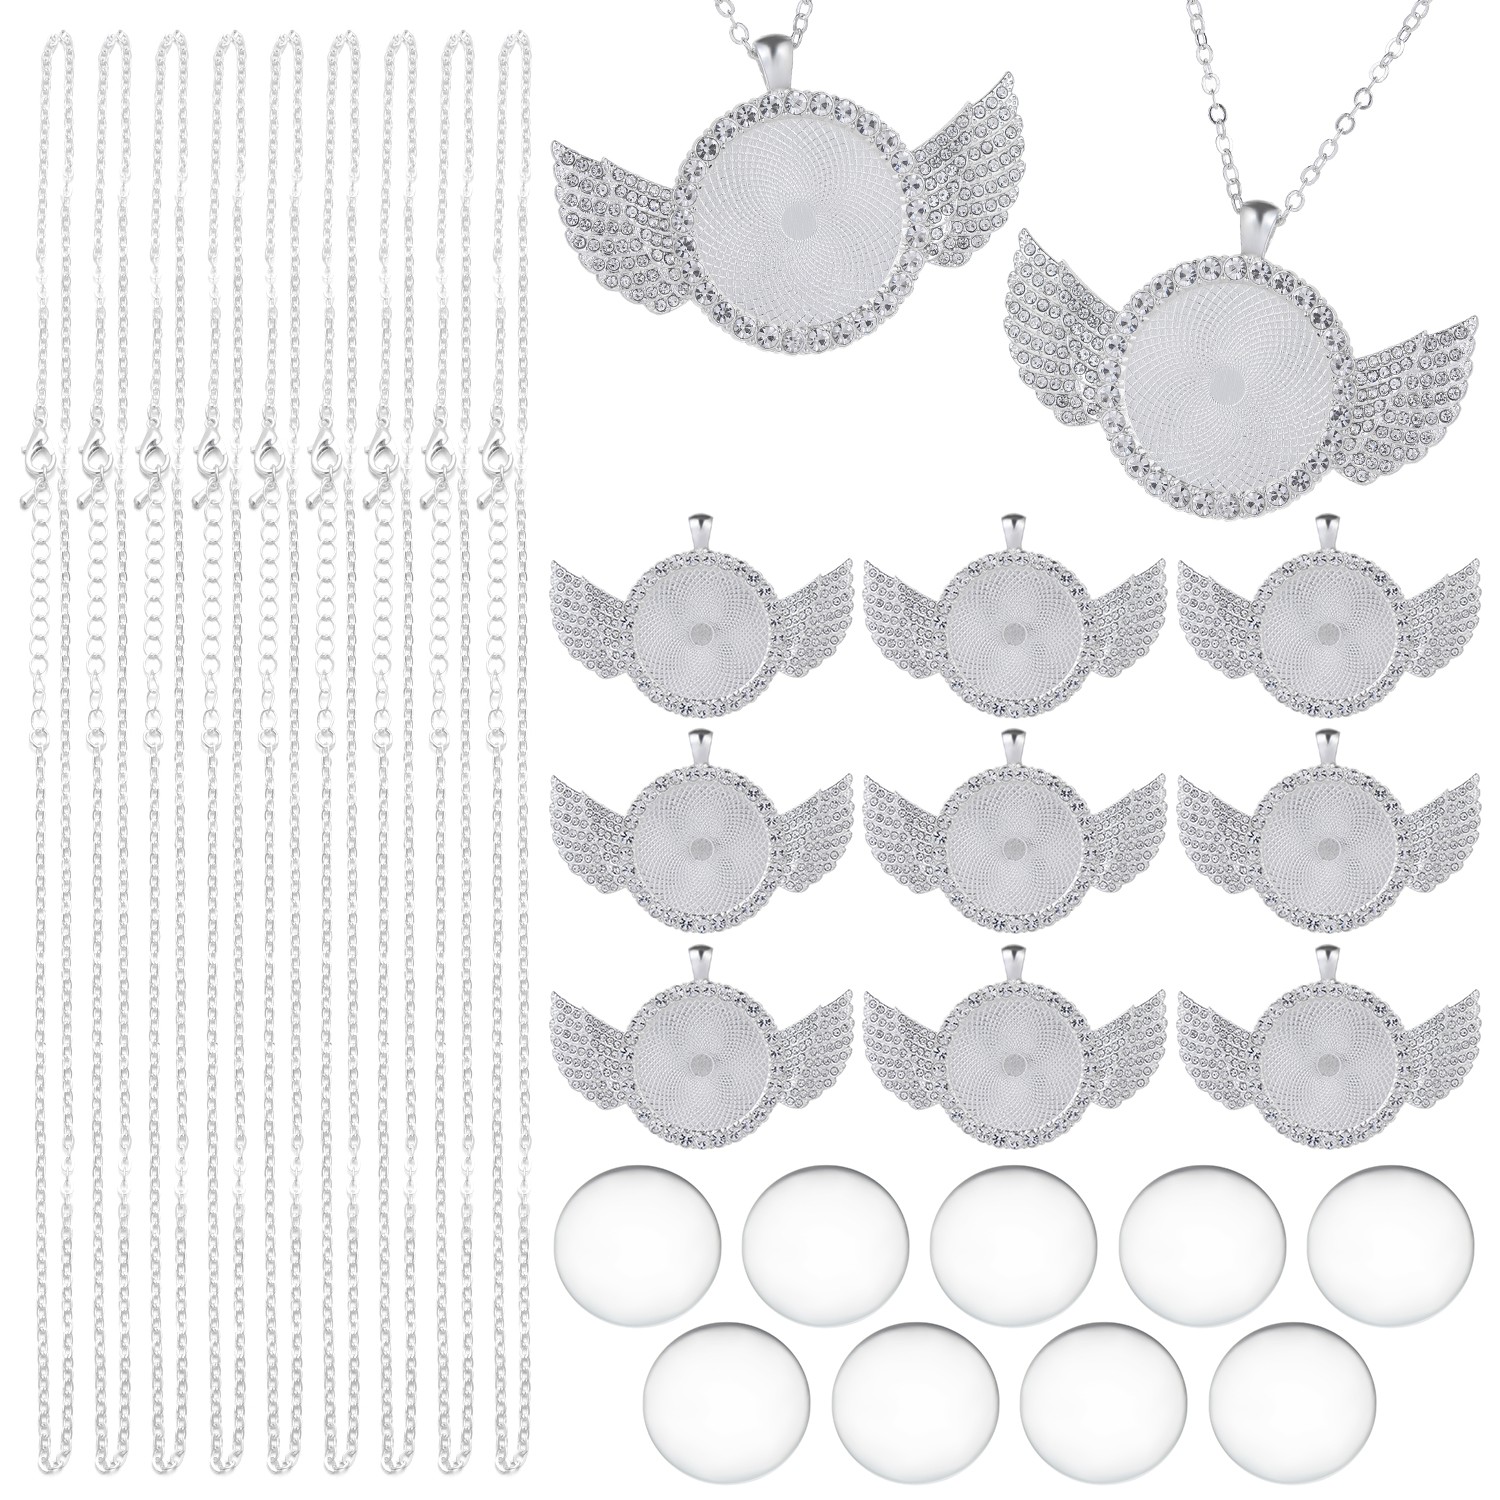 BEAUTY 27PCs/Set Gift for friend Bezel Pendant Trays Set For Necklace/Bracelet/Keychain With Glass Cabochons Wing Pendant Crafts Making Supplies New Lobster Clasps Chains for DIY Jewelry|Wing Bezel Pendant Trays